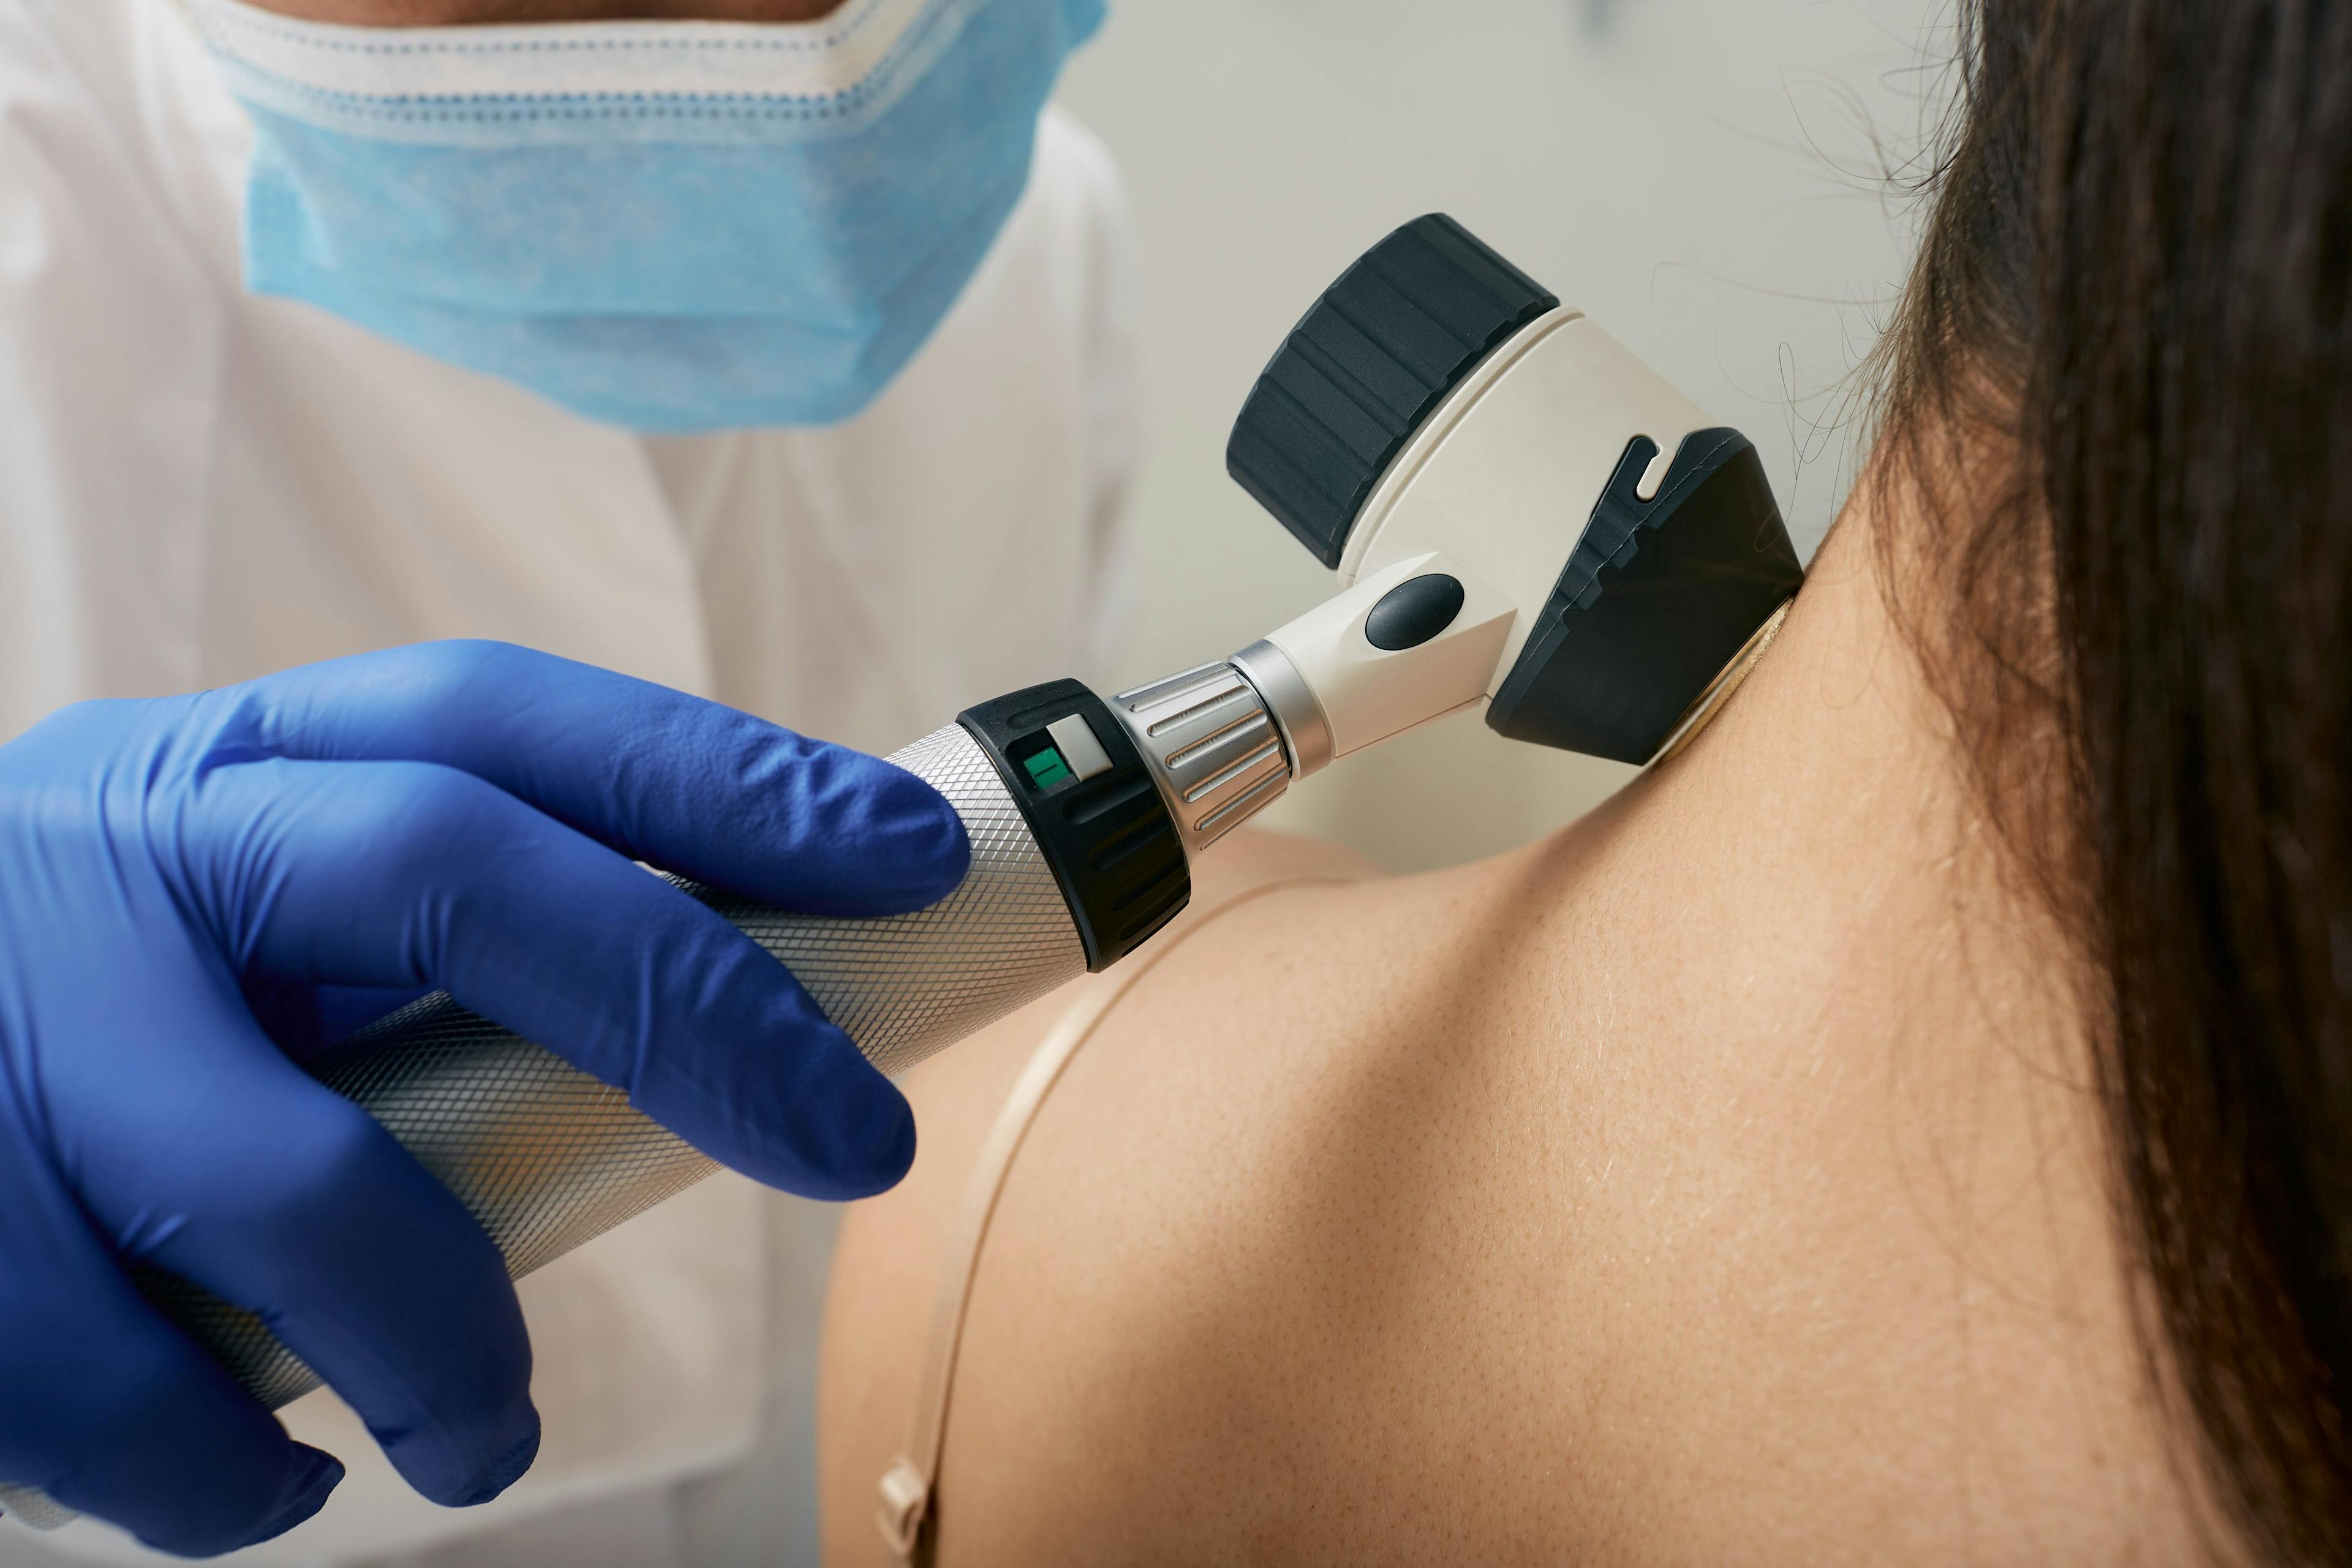 Doctor examines patient's mole with a dermatoscope